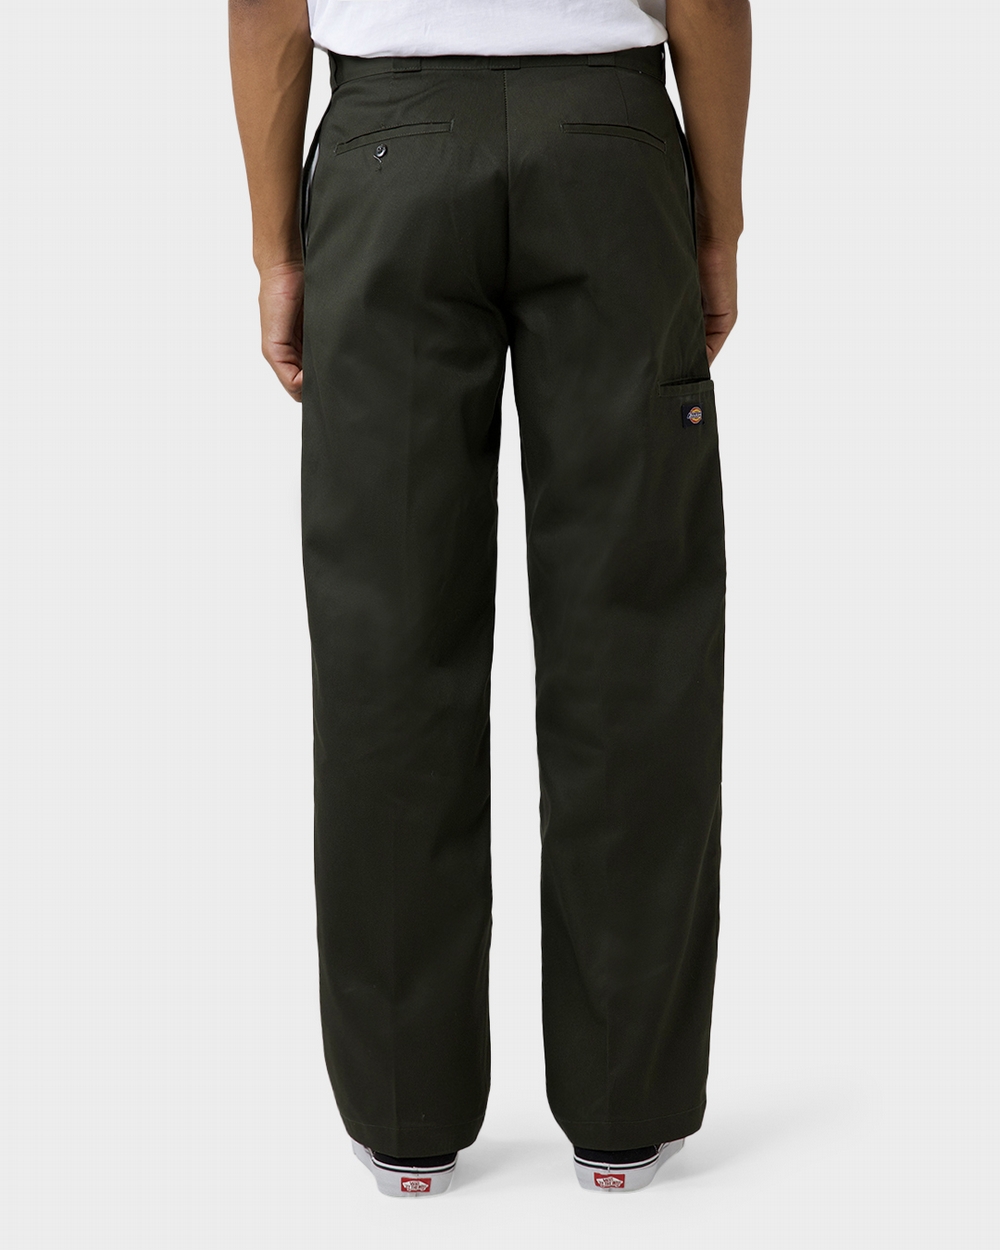 Pull&Bear relaxed linen pants in olive green | ASOS